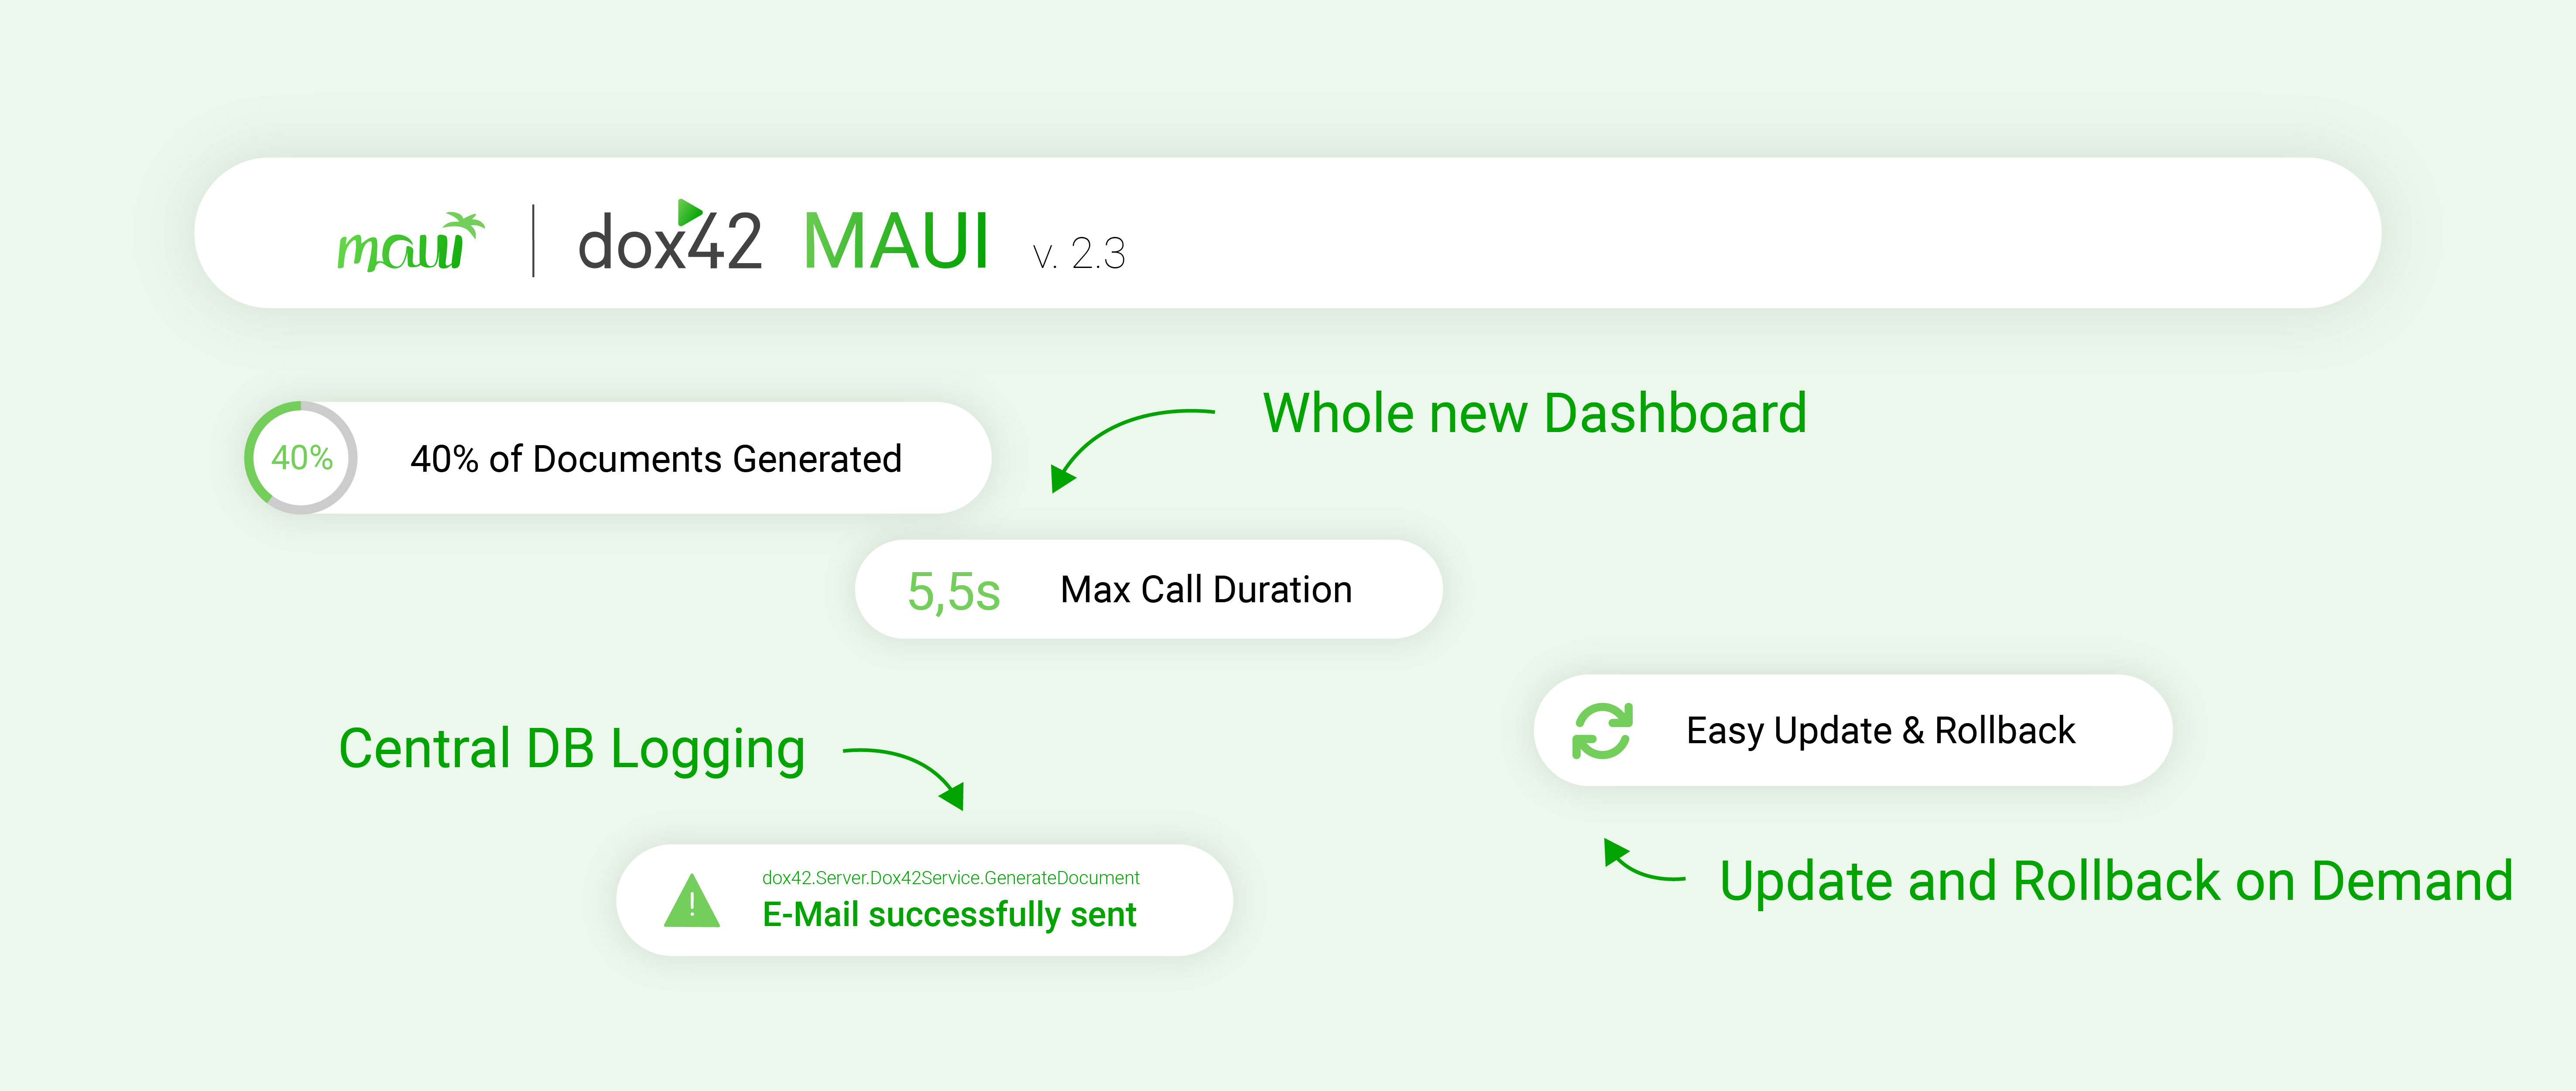 dox42 Online MAUI v. 2.3. out now